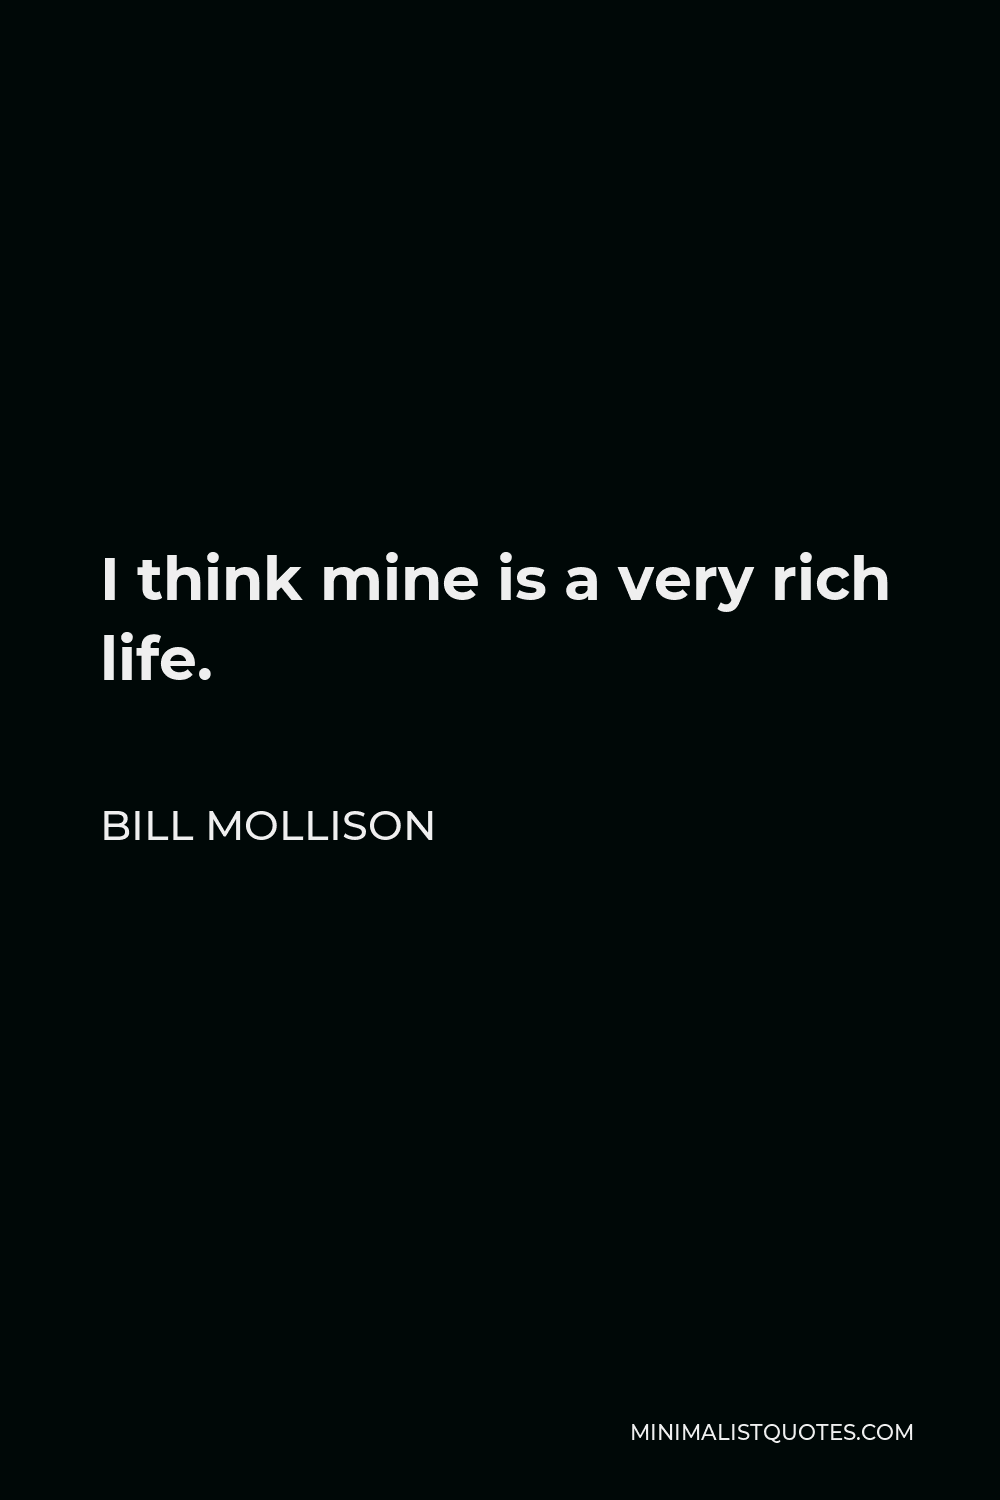 Bill Mollison Quote - I think mine is a very rich life.